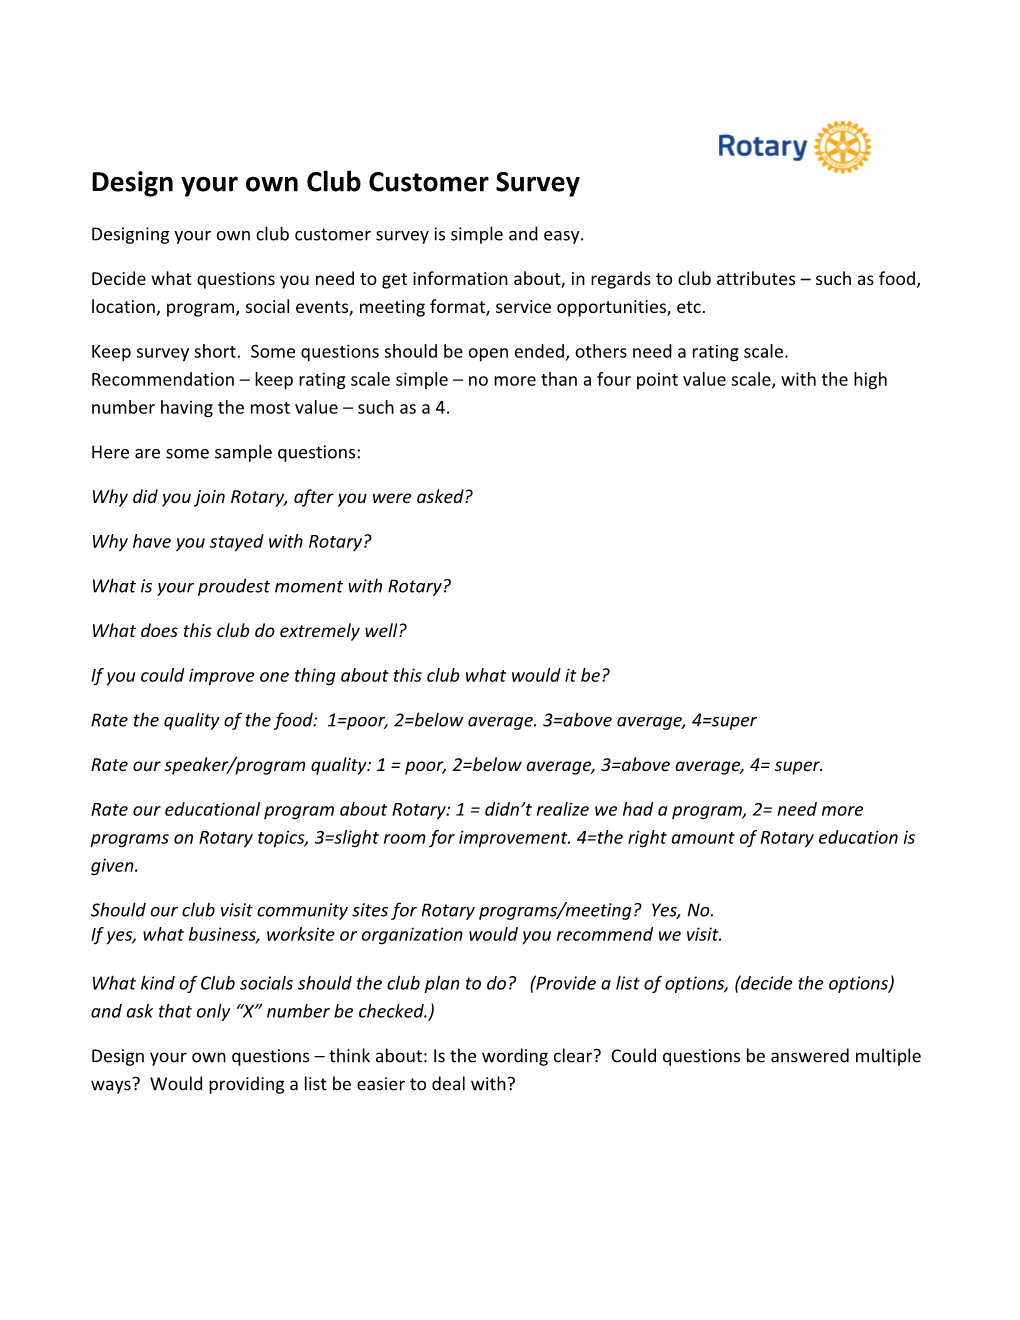 Designing Your Own Club Customer Survey Is Simple and Easy